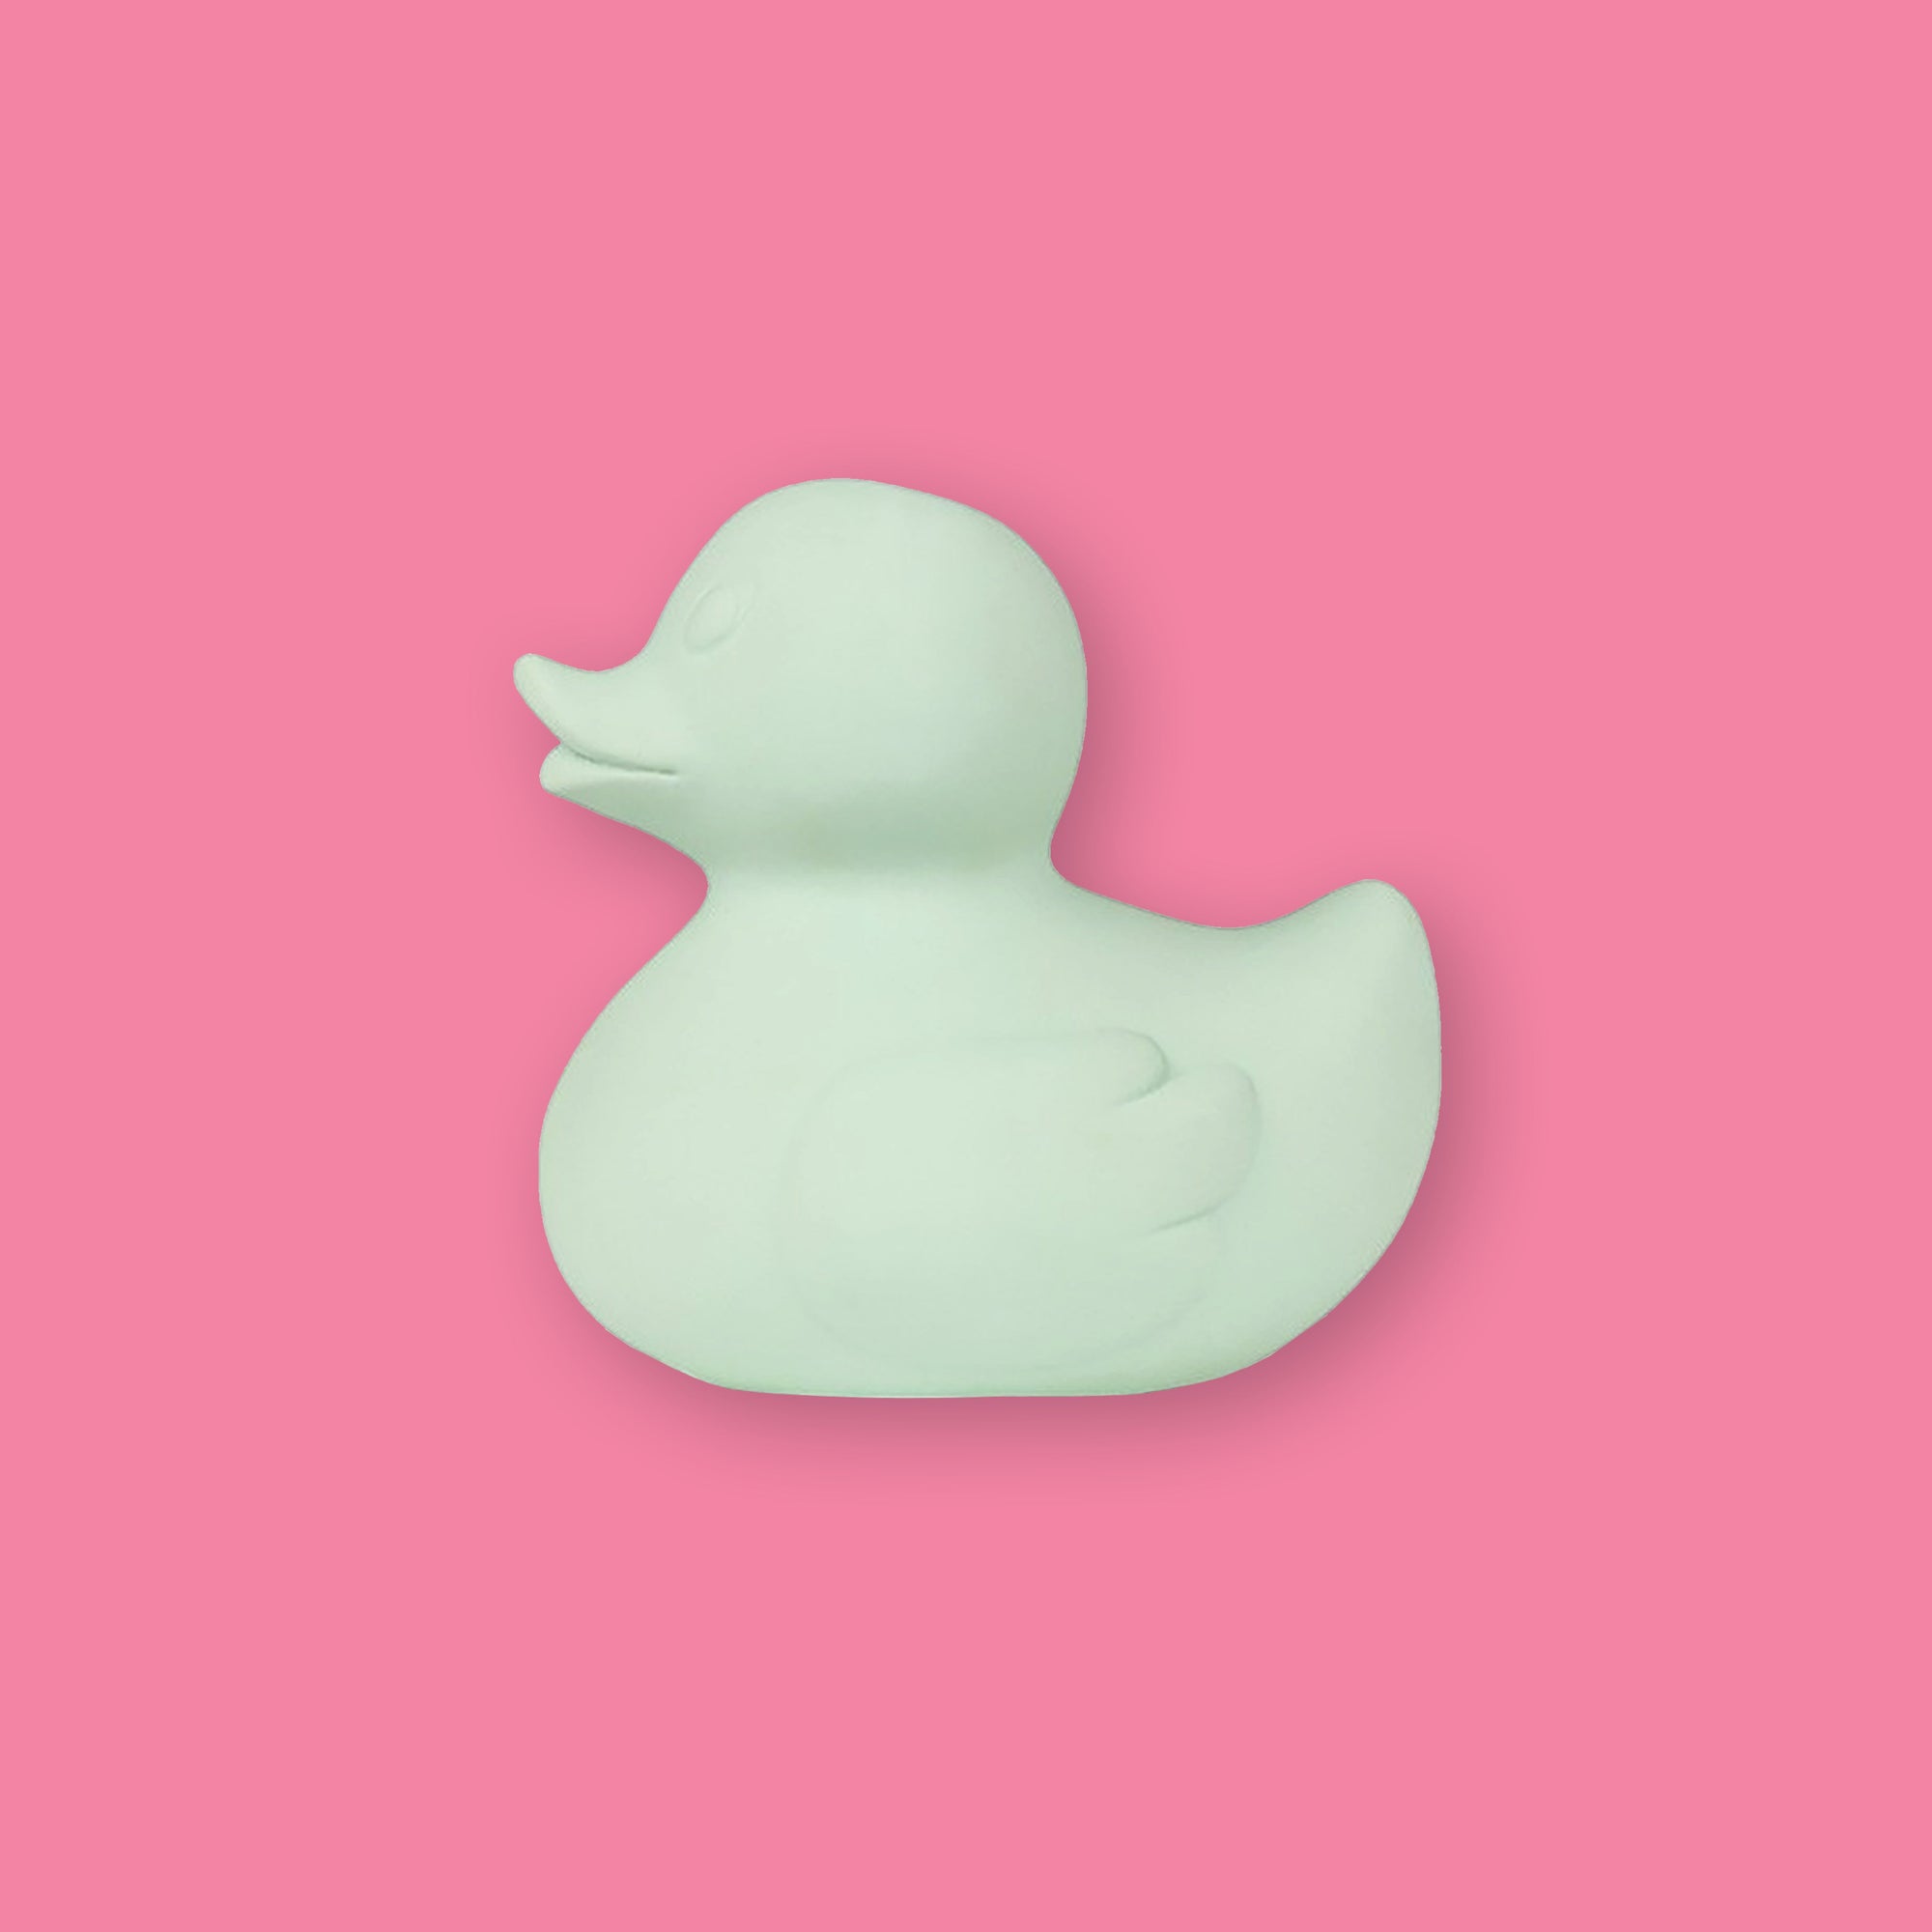 On a bubblegum pink background sits a sage green rubber duckie.